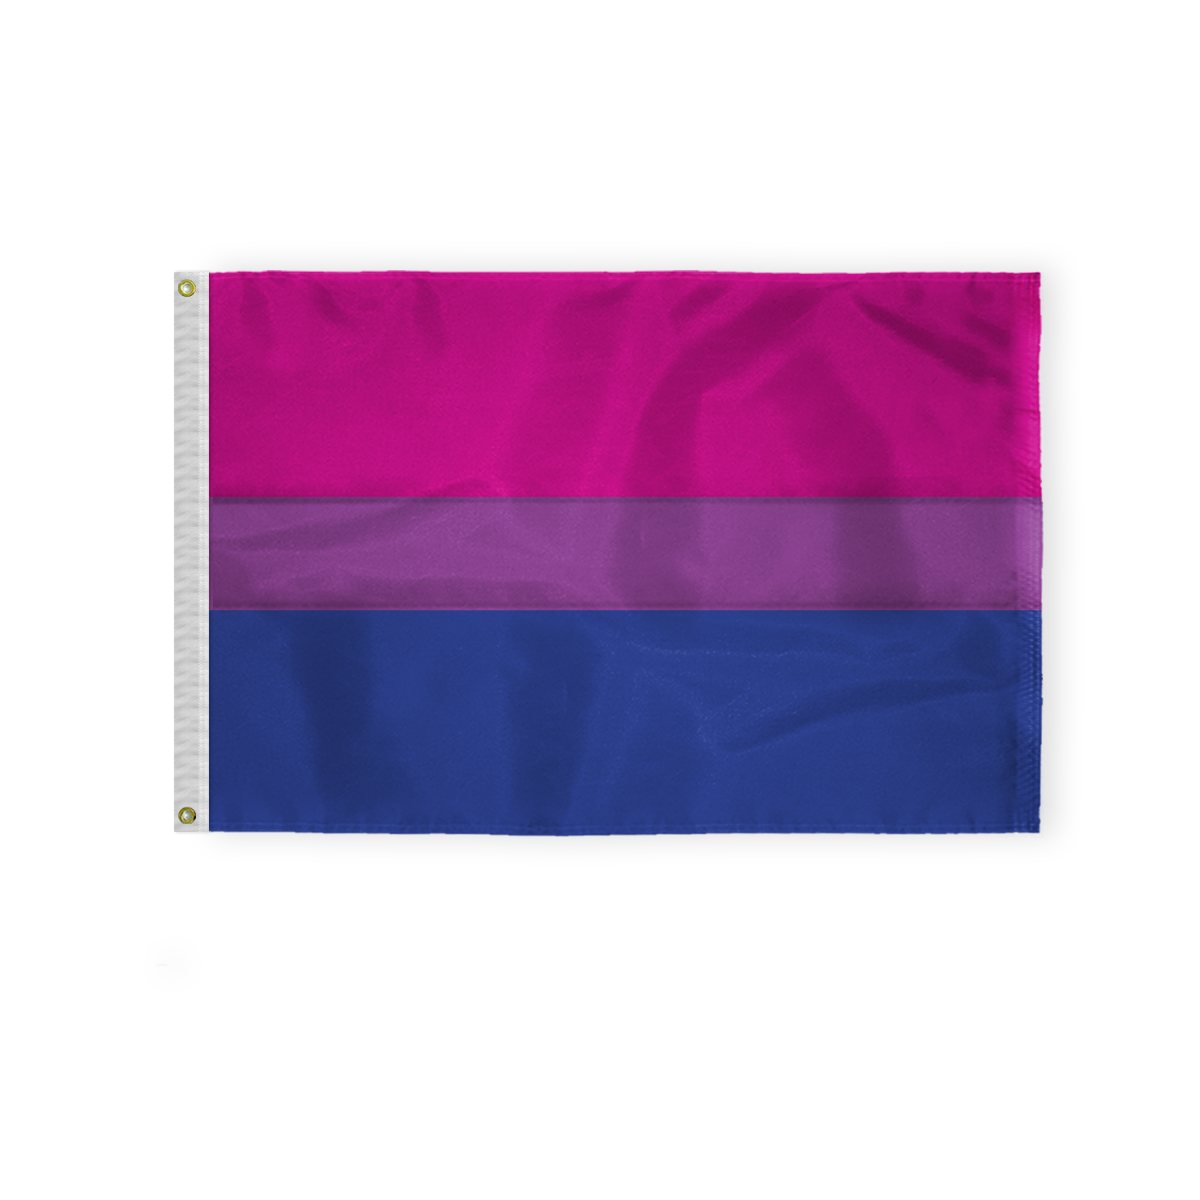 AGAS Bi Pride Flag 2x3 Ft - Double Sided Printed 200D Nylon